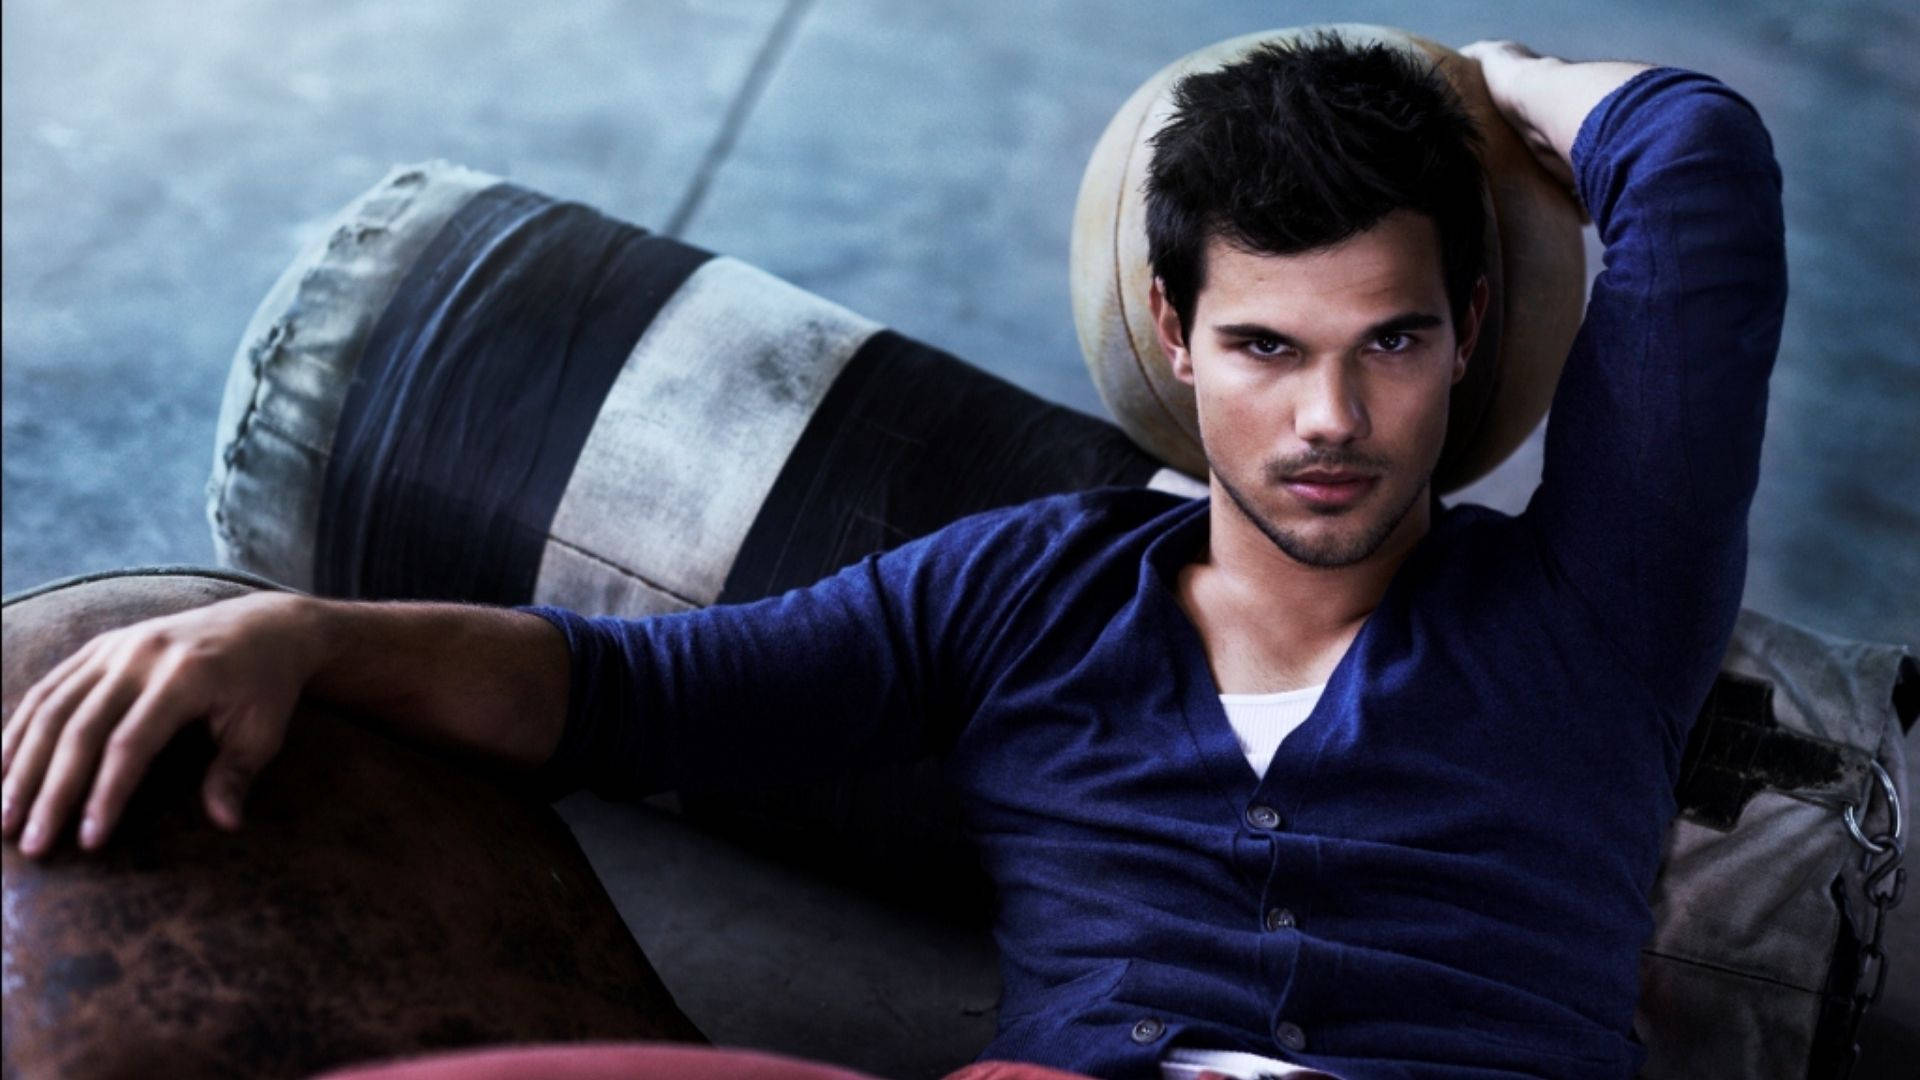 Caption: Hollywood Star - Taylor Lautner In A Stylish Attire Background